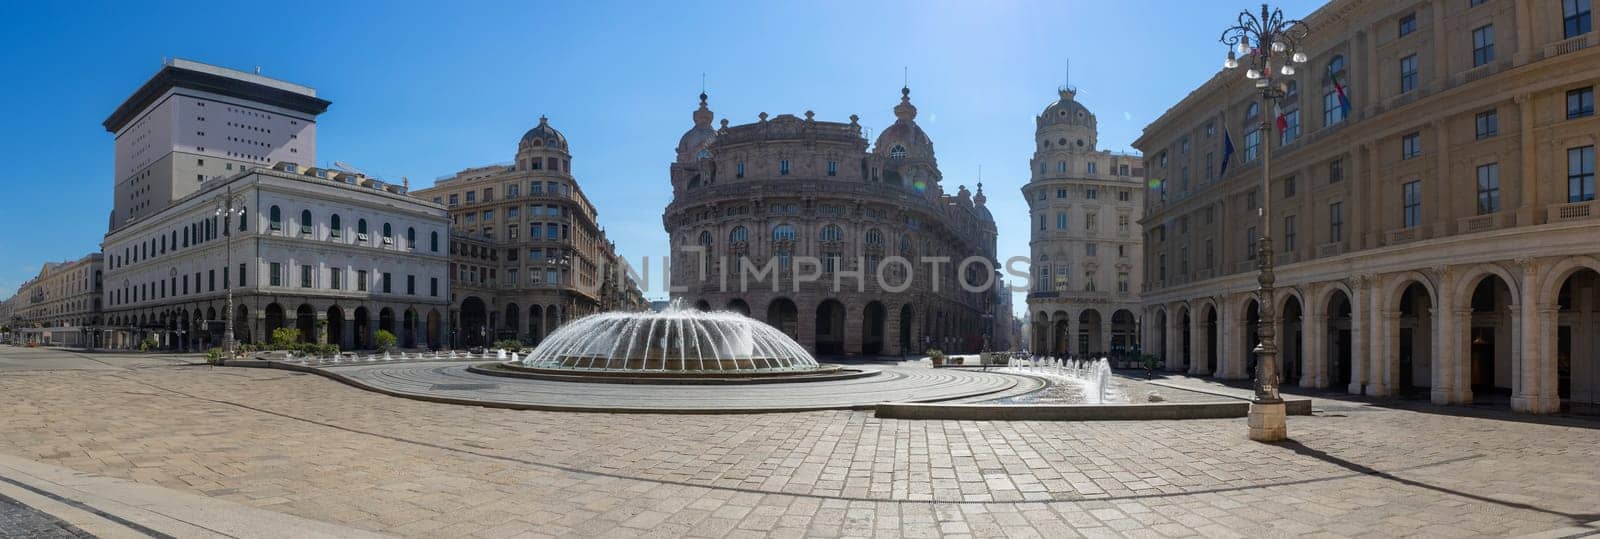 This panoramic image showcases a grand European square bathed in the soft glow of morning light. The focal point is an elegant fountain, its water sparkling in the sun, surrounded by an array of stately buildings with classic architectural details, all under a clear blue sky.